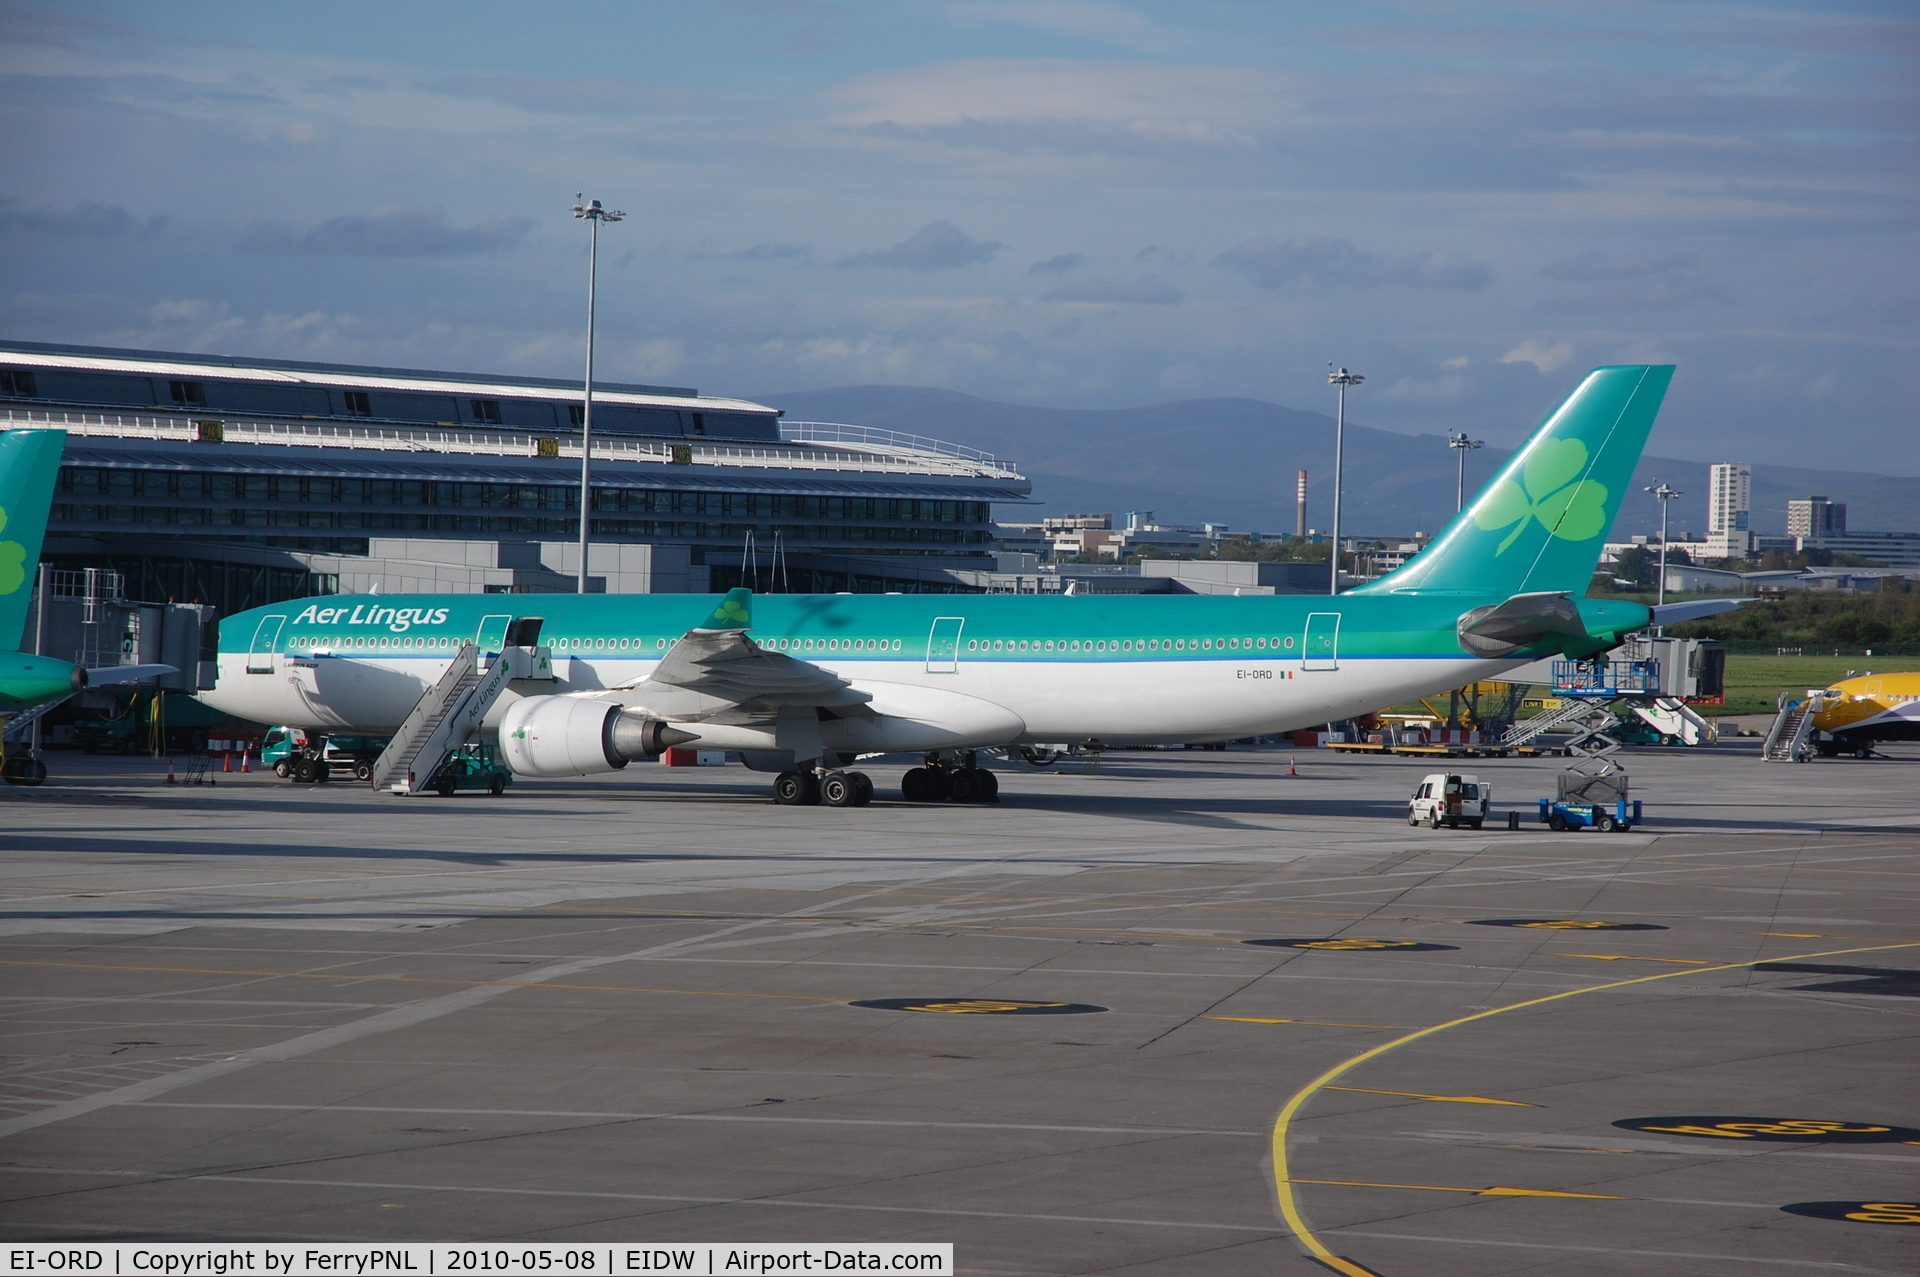 EI-ORD, Airbus A330-301 C/N 059, One of their older A333's which left EI's fleet now.